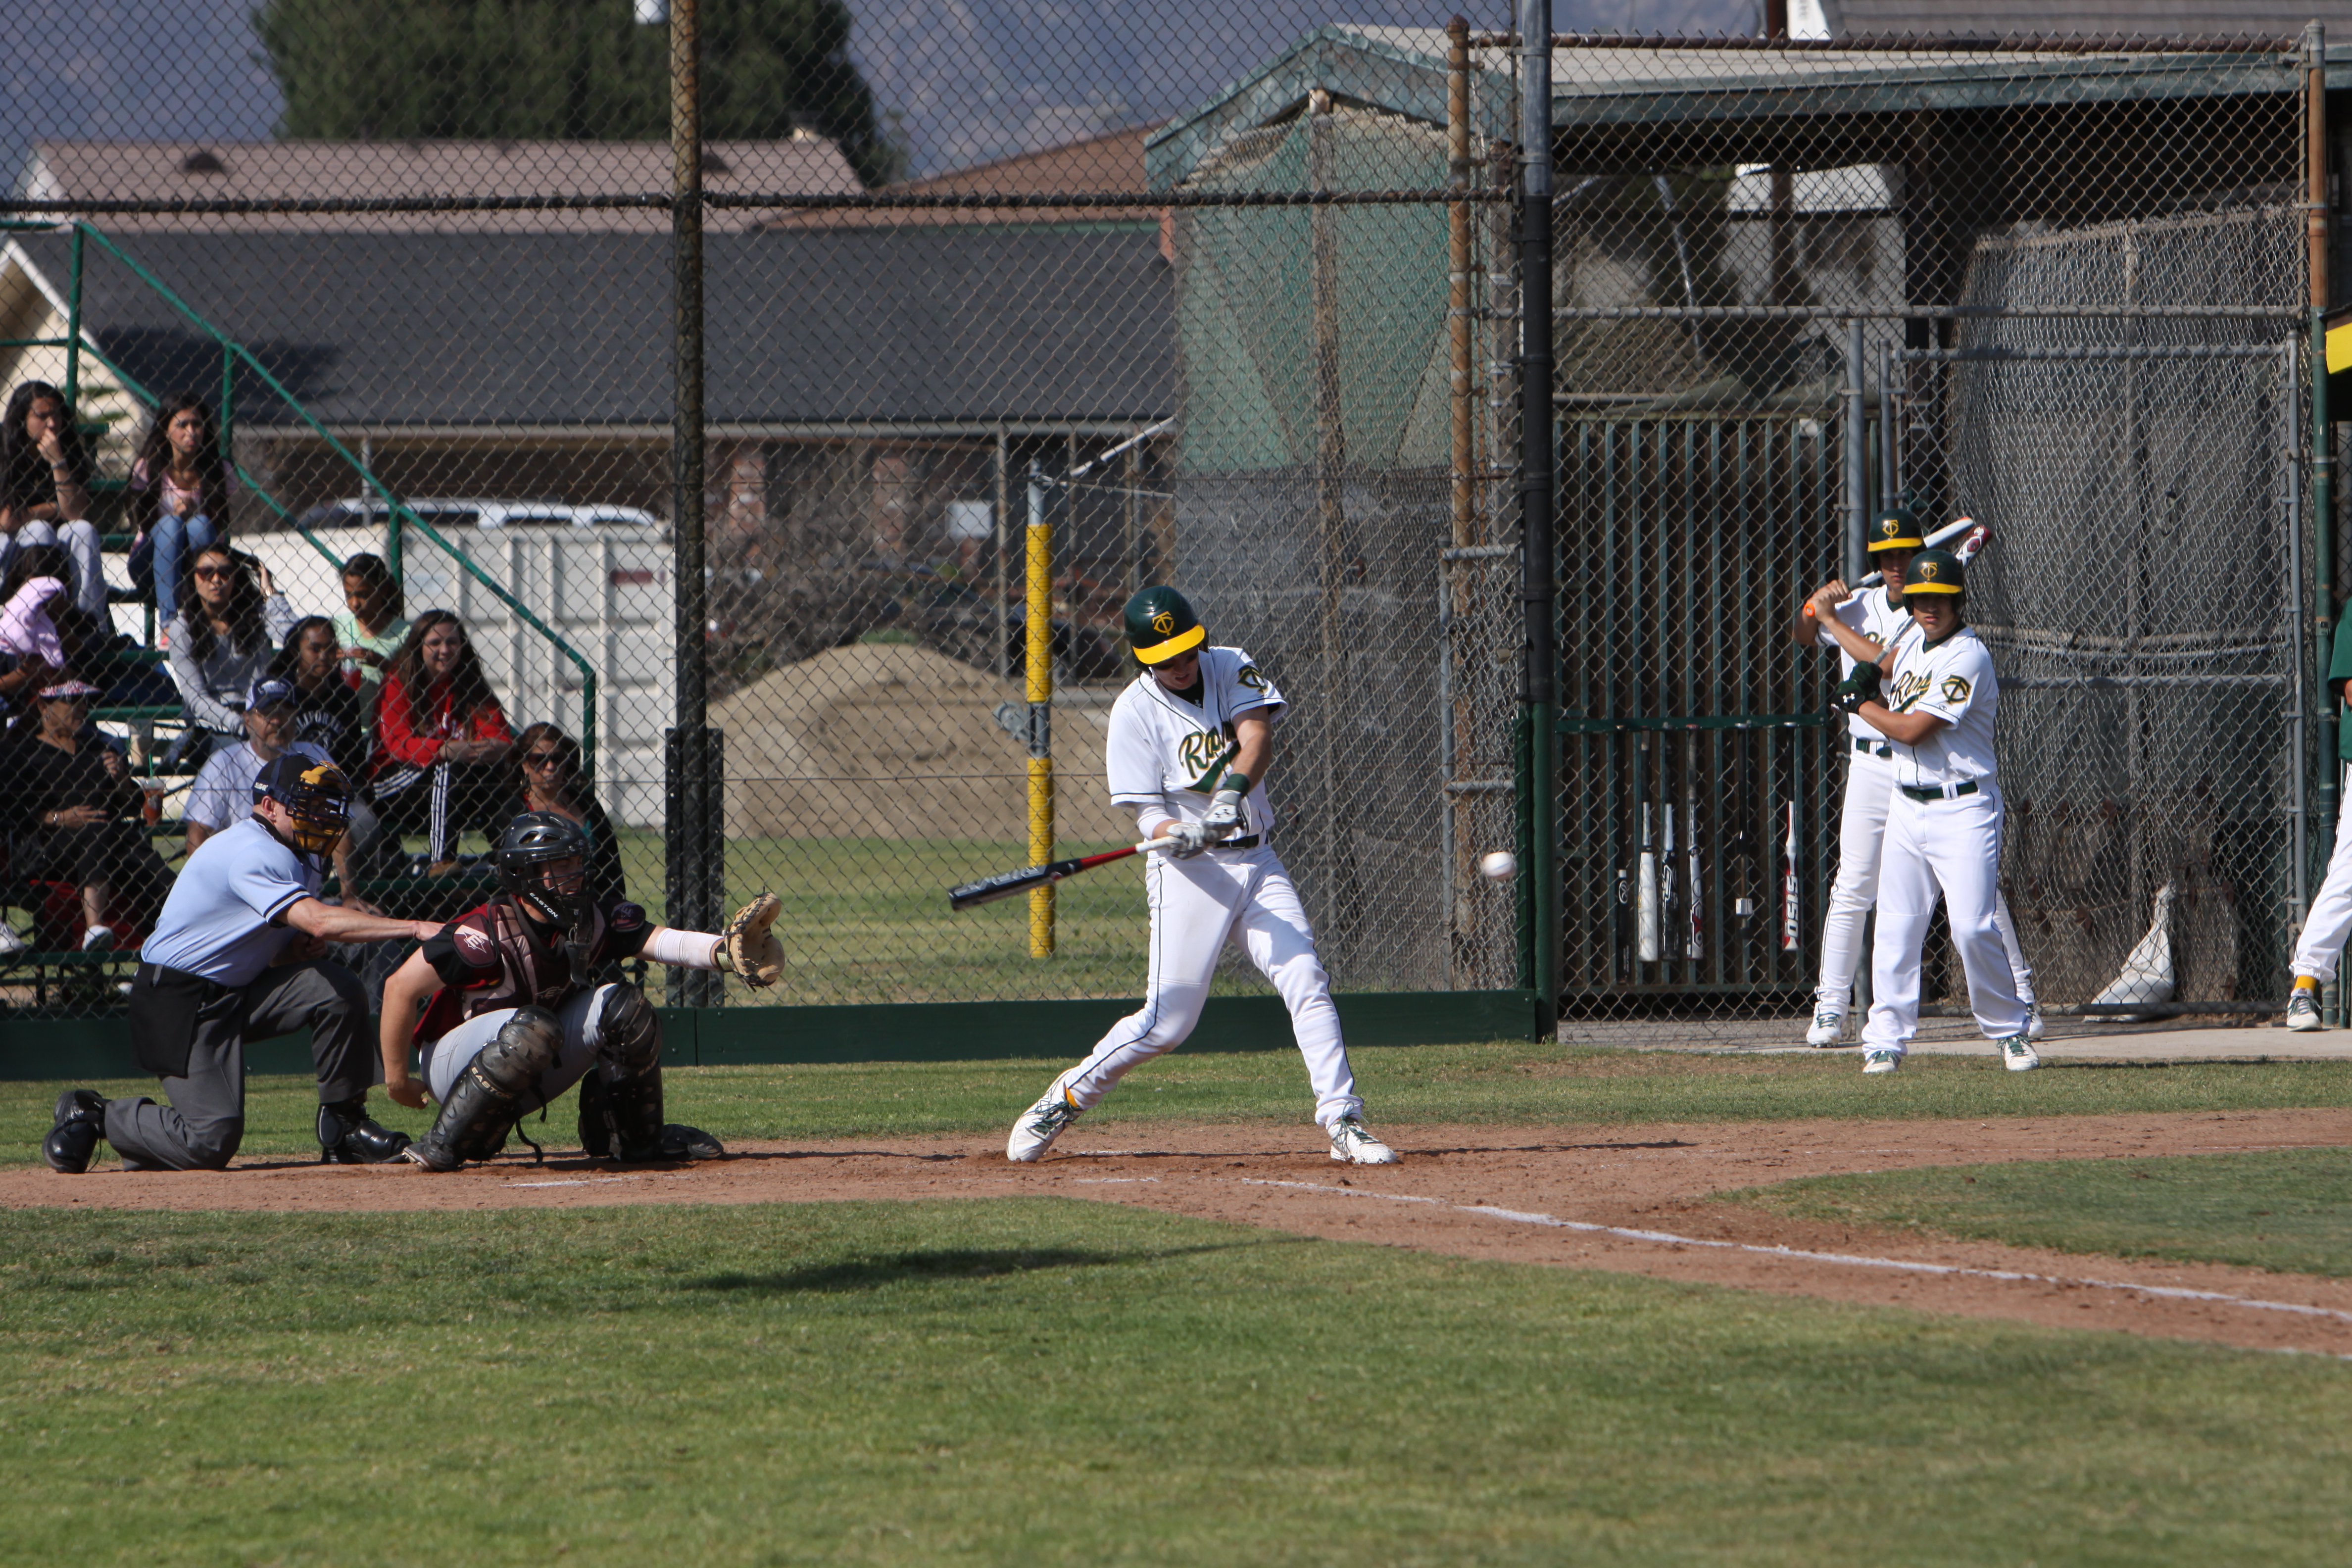 Varsity baseball pitches their way to a promising start of the season